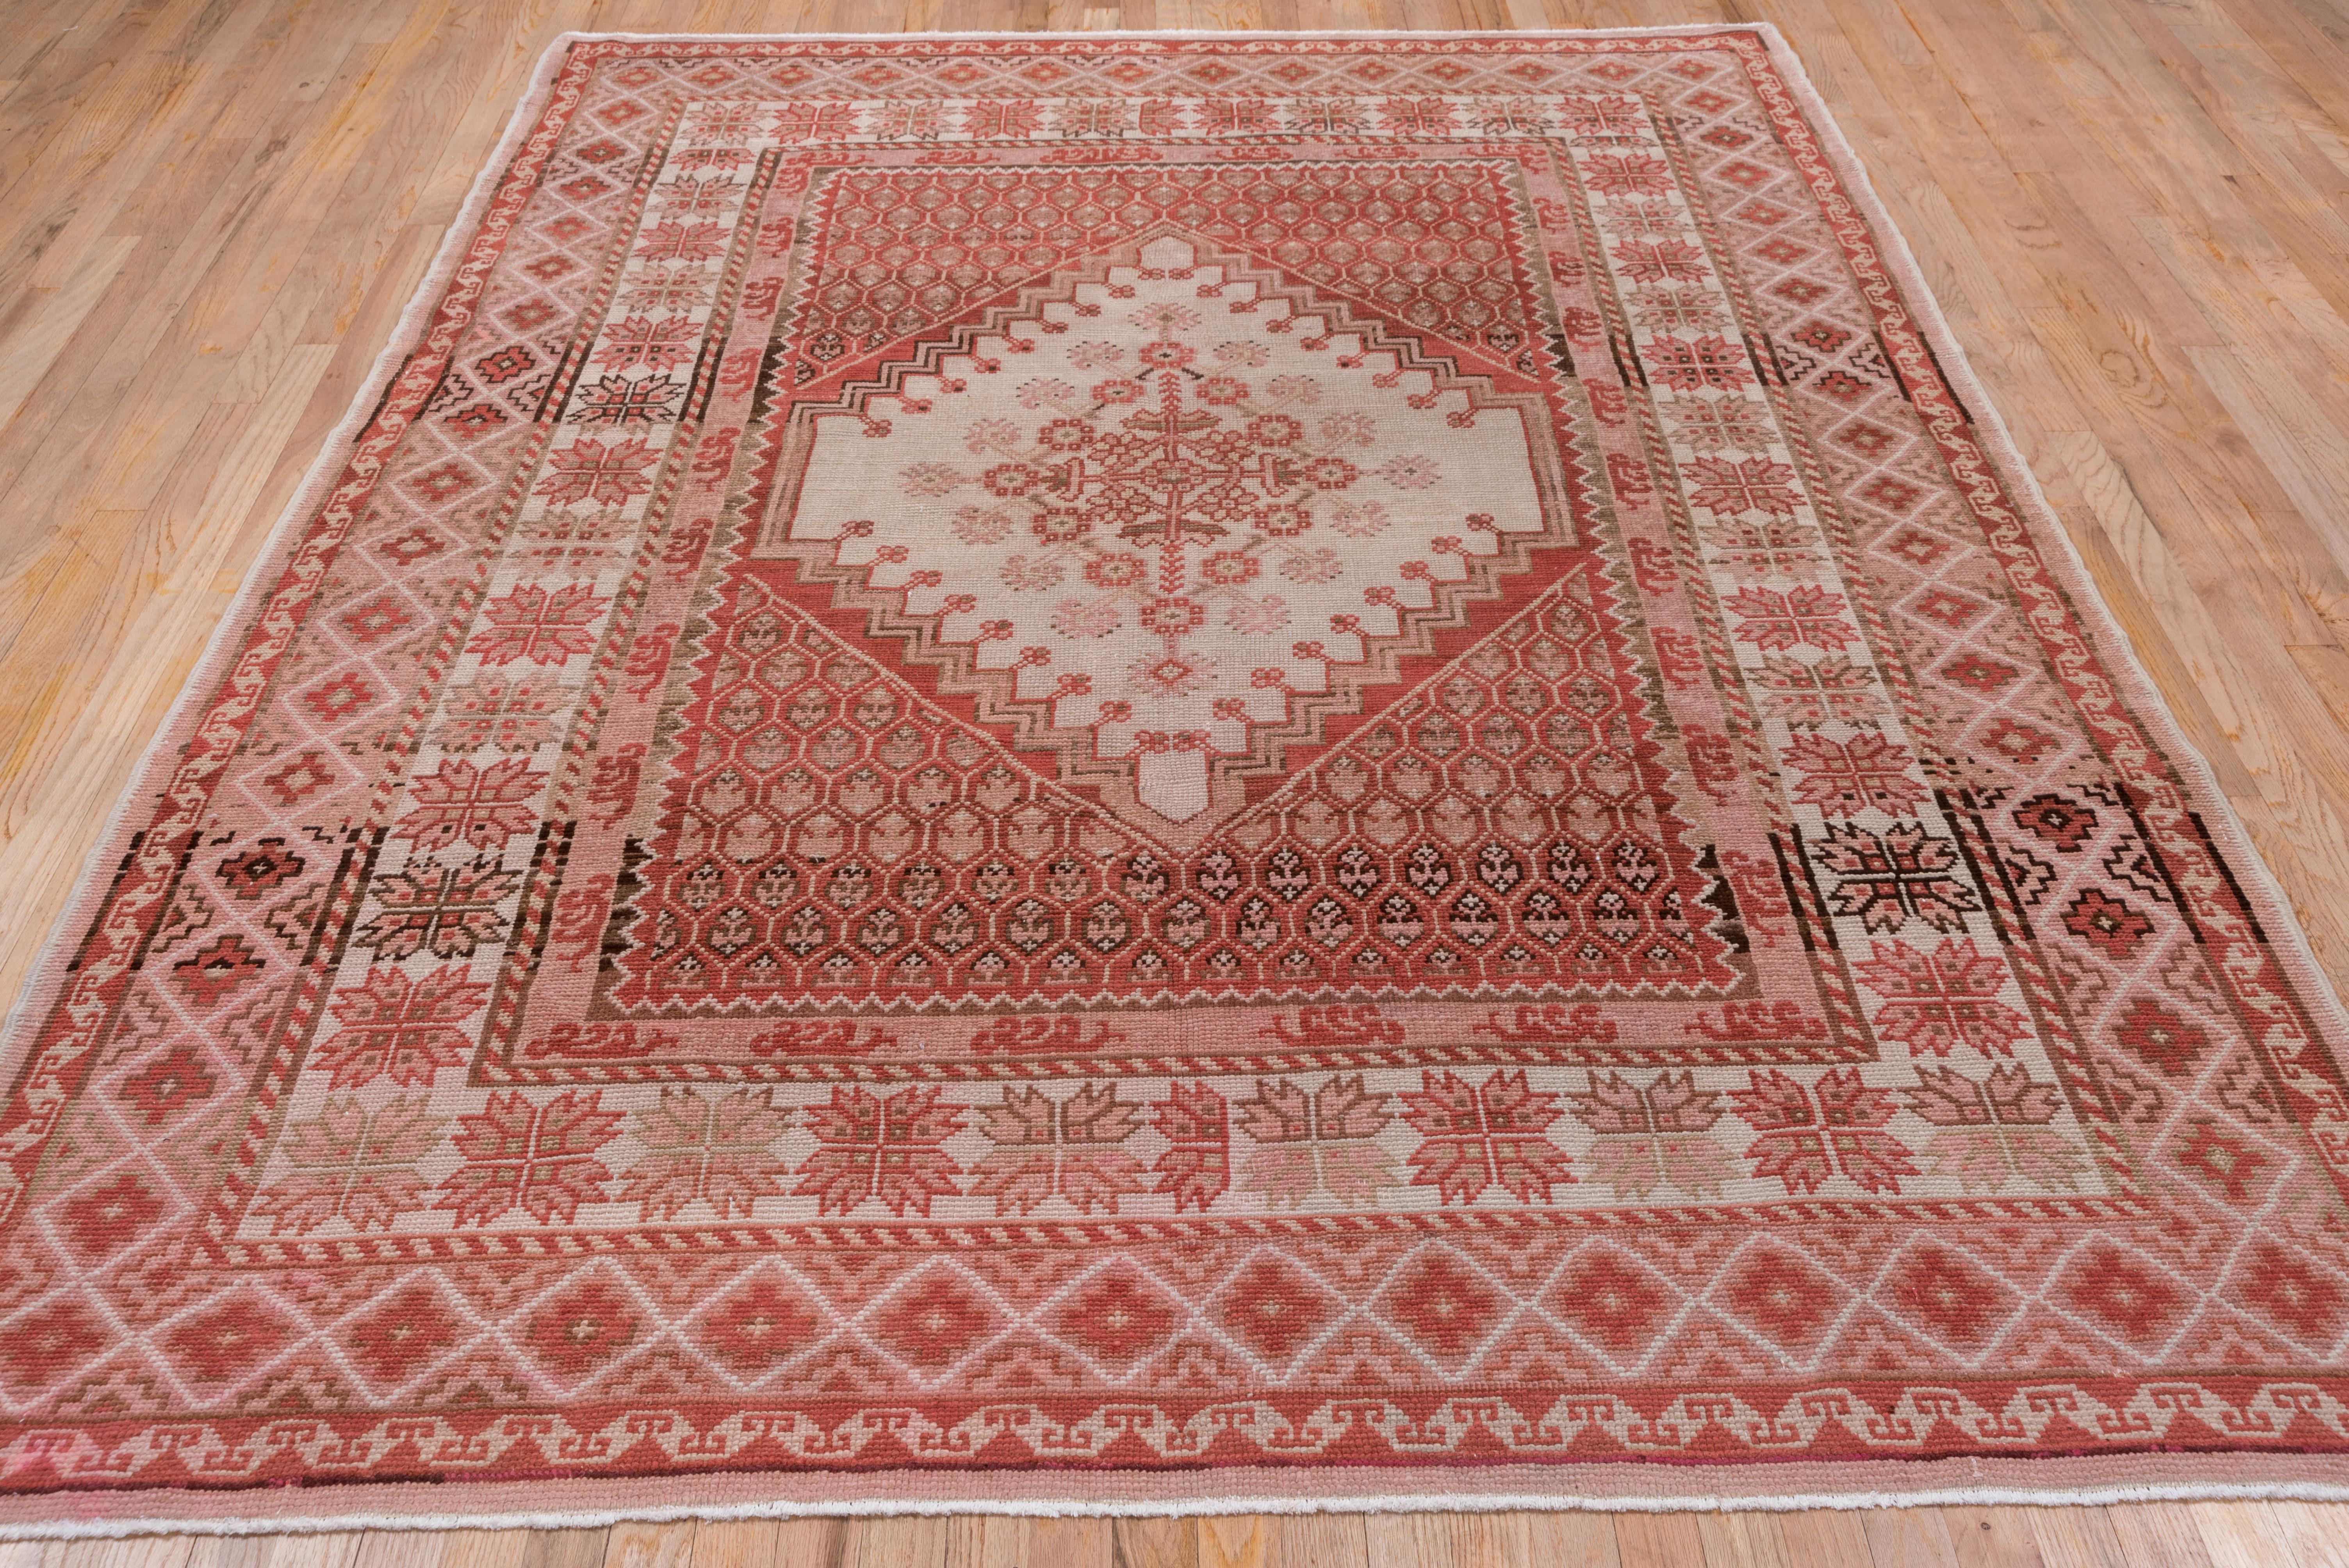 The old ivory sub-field displays a carnation and rosette skeletal medallion while the supporting brown field shows a mall hexagonal lattice pattern enclosing little flowers. The old ivory min border of this northwest Turkish carpet exhibits an